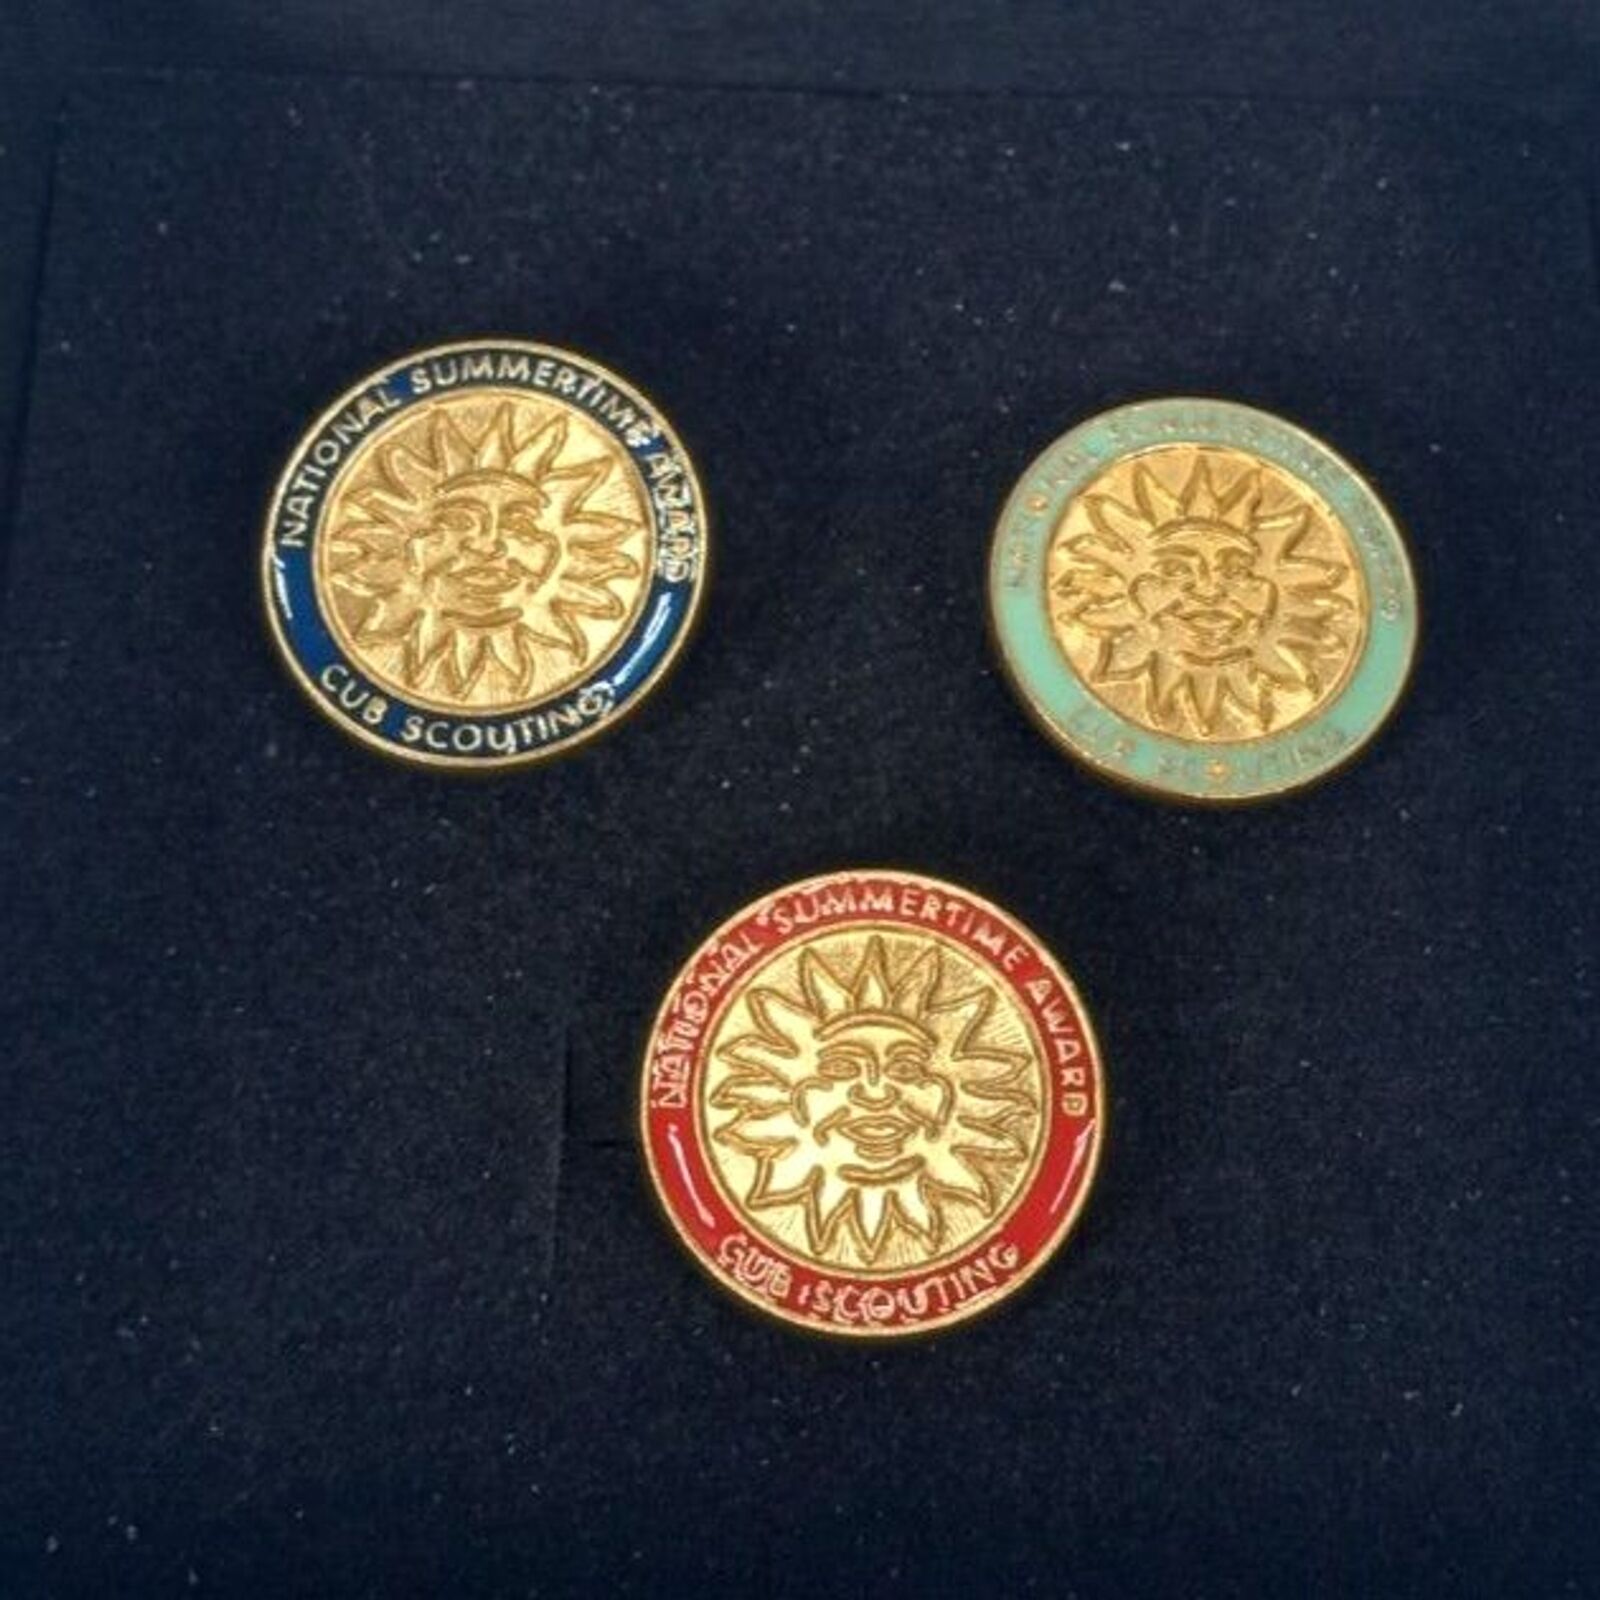 Vintage Cub Scouting National Summertime Award Set Of Three Boy Scouts USA